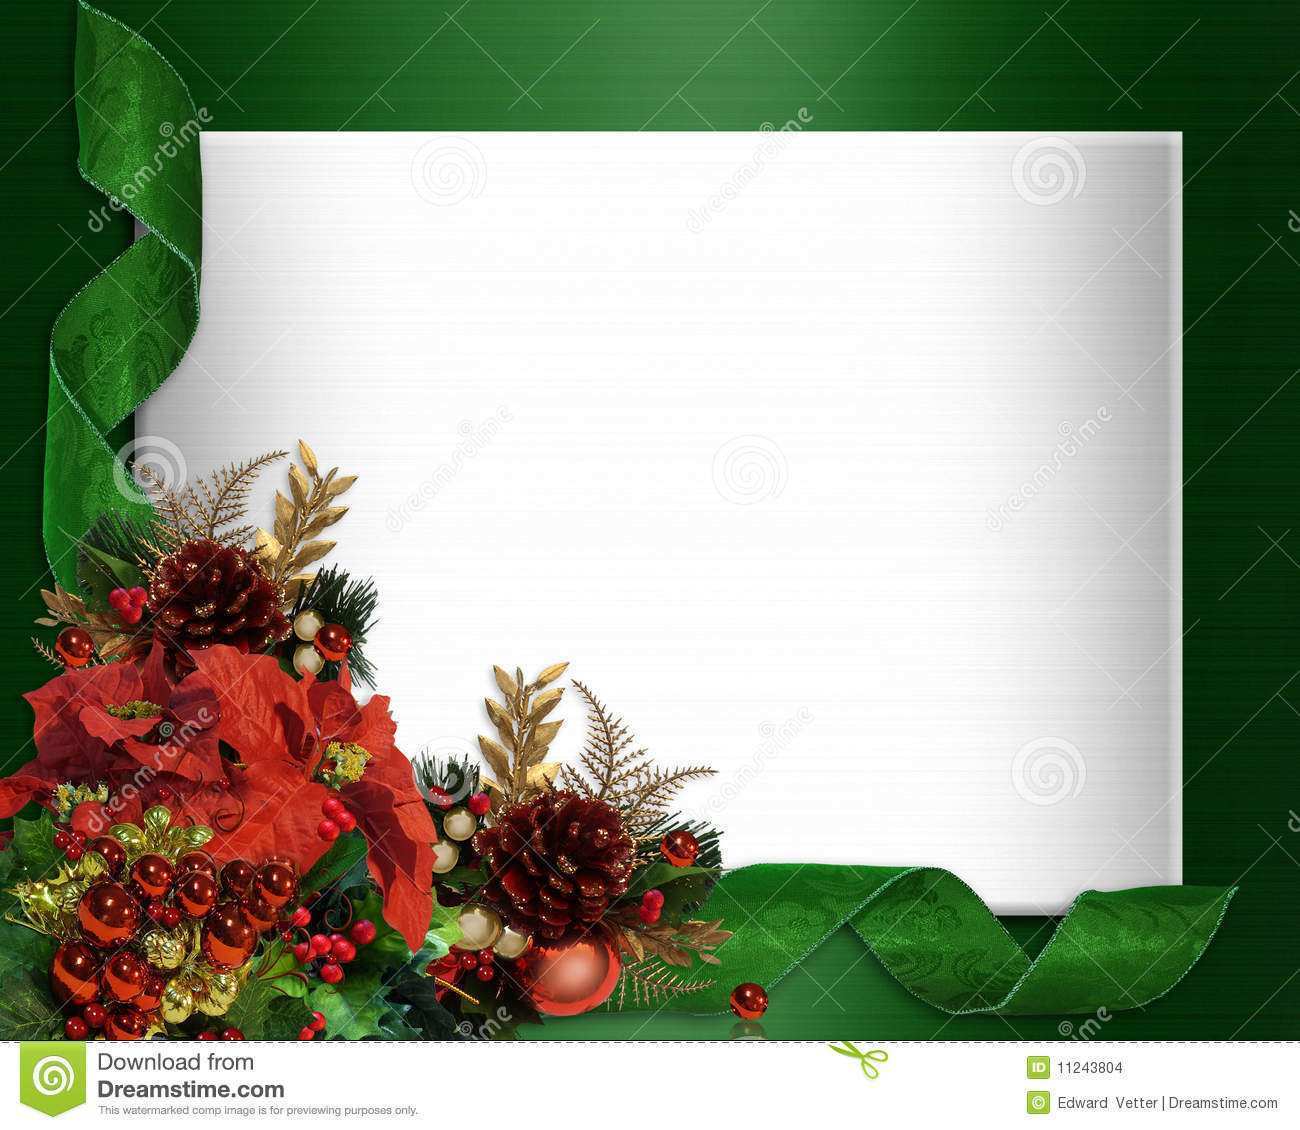 16 Christmas Card Template Border in Word by Christmas Card Template Border